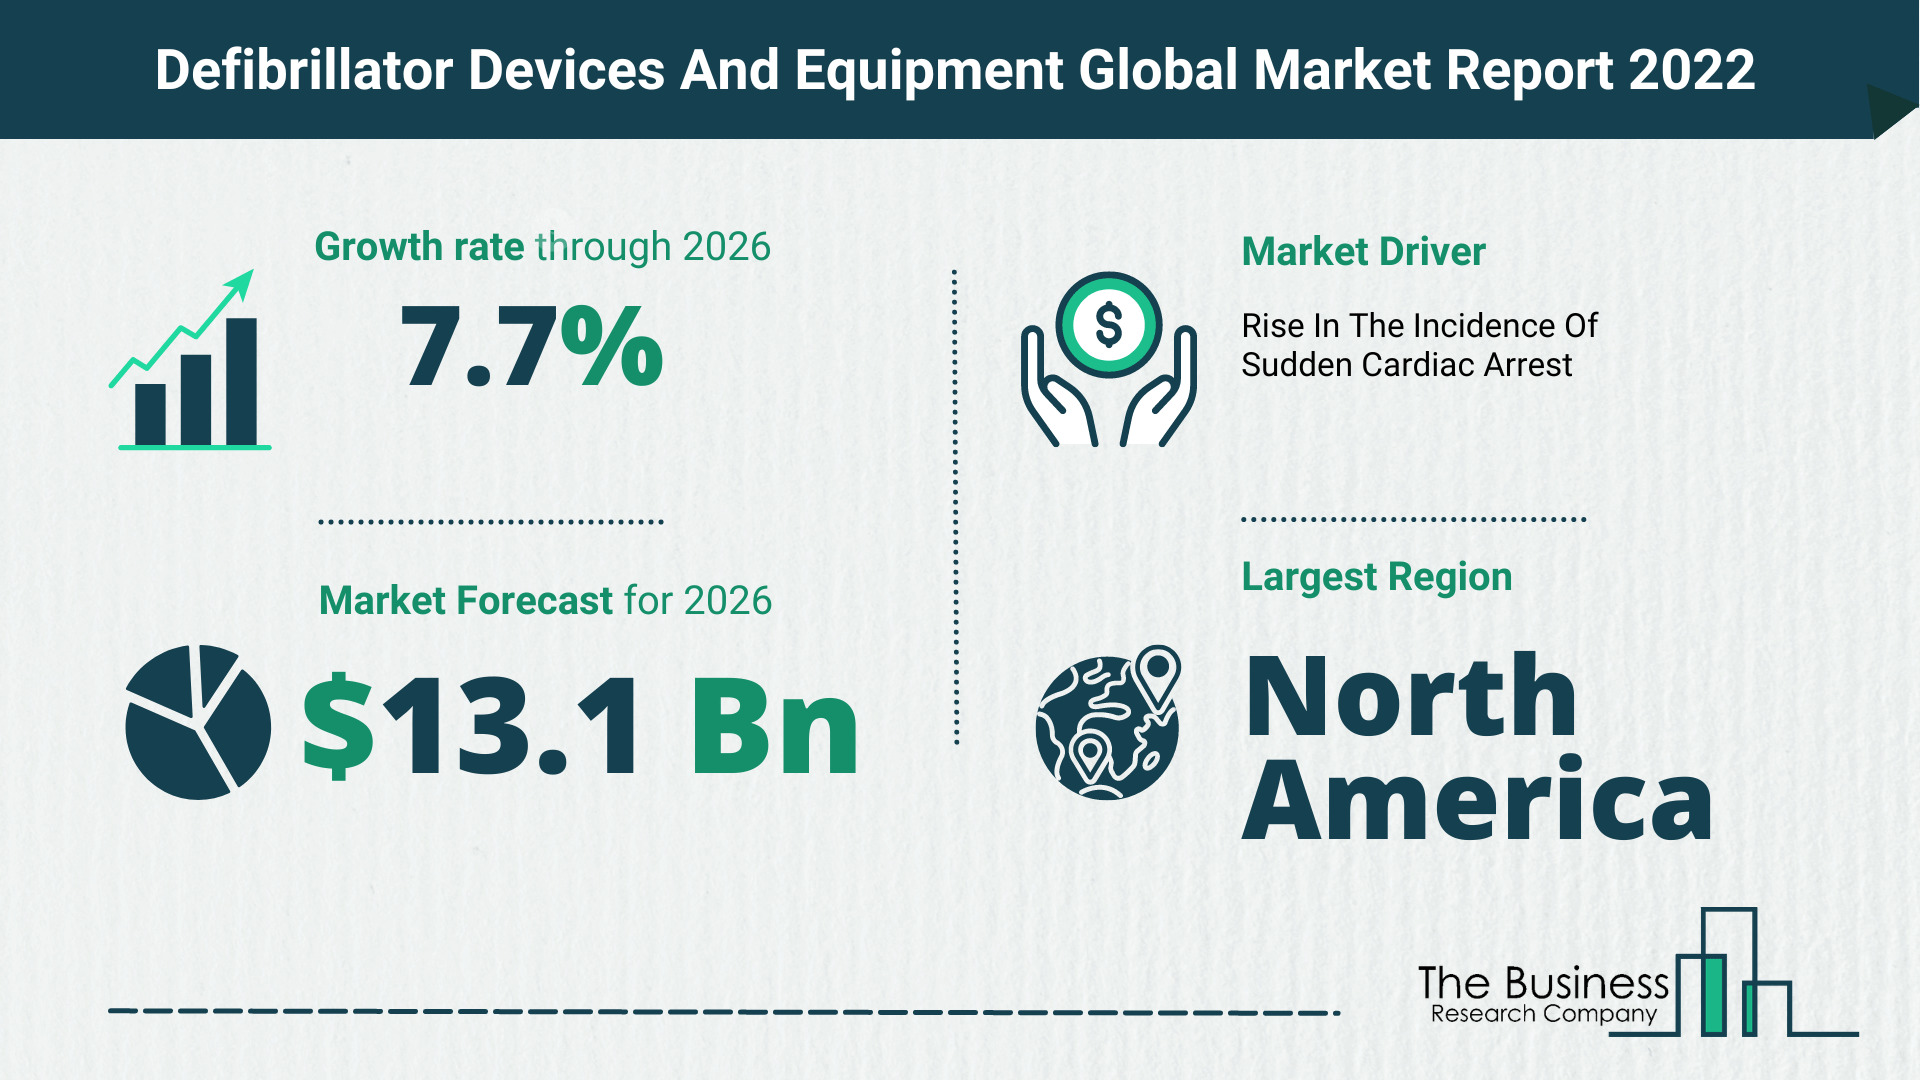 What Is The Defibrillator Devices And Equipment Market Overview In 2022?